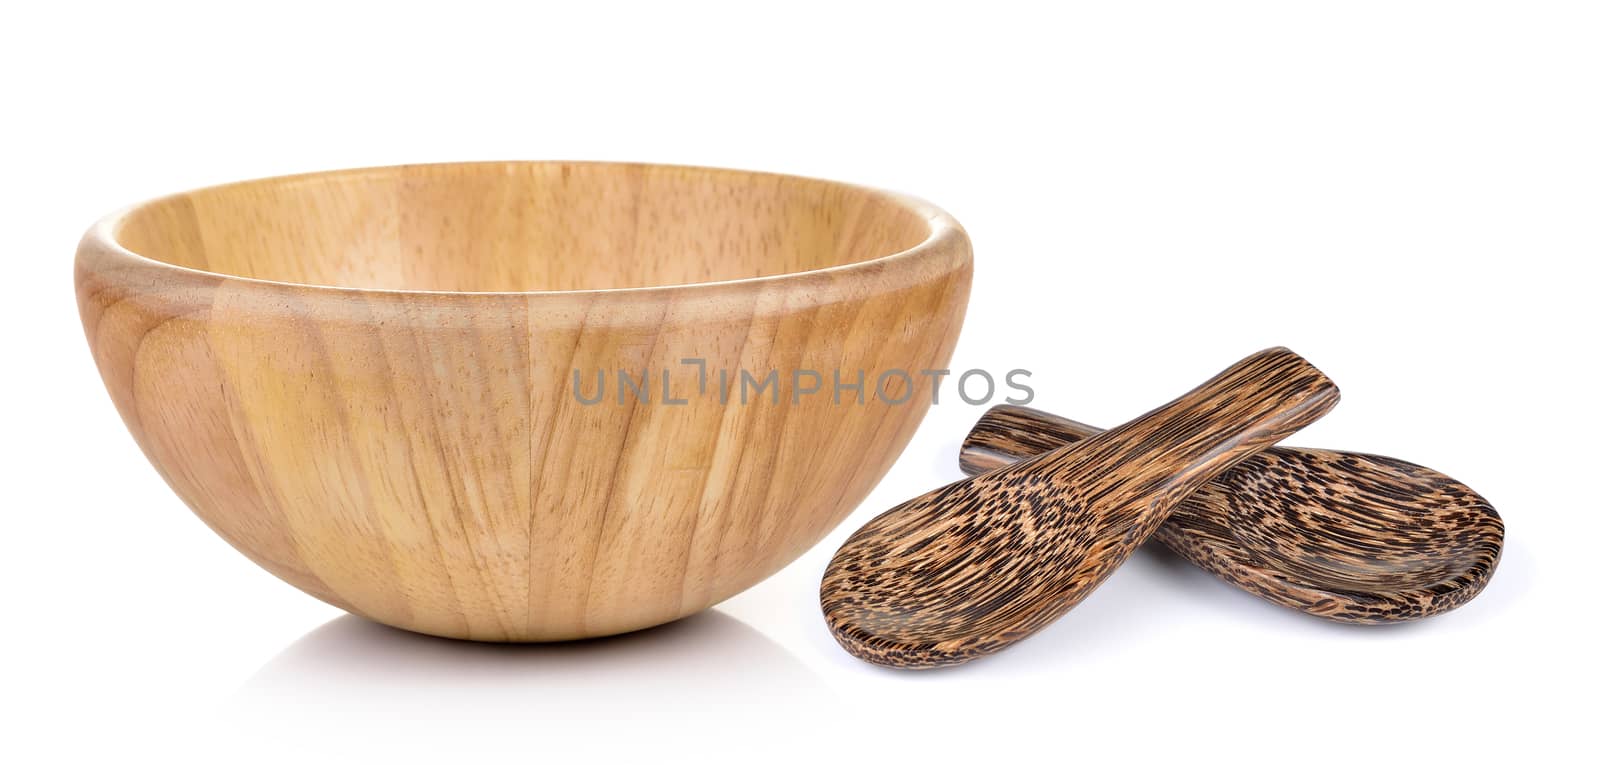 wood bowl and wood spoon on white background by sommai